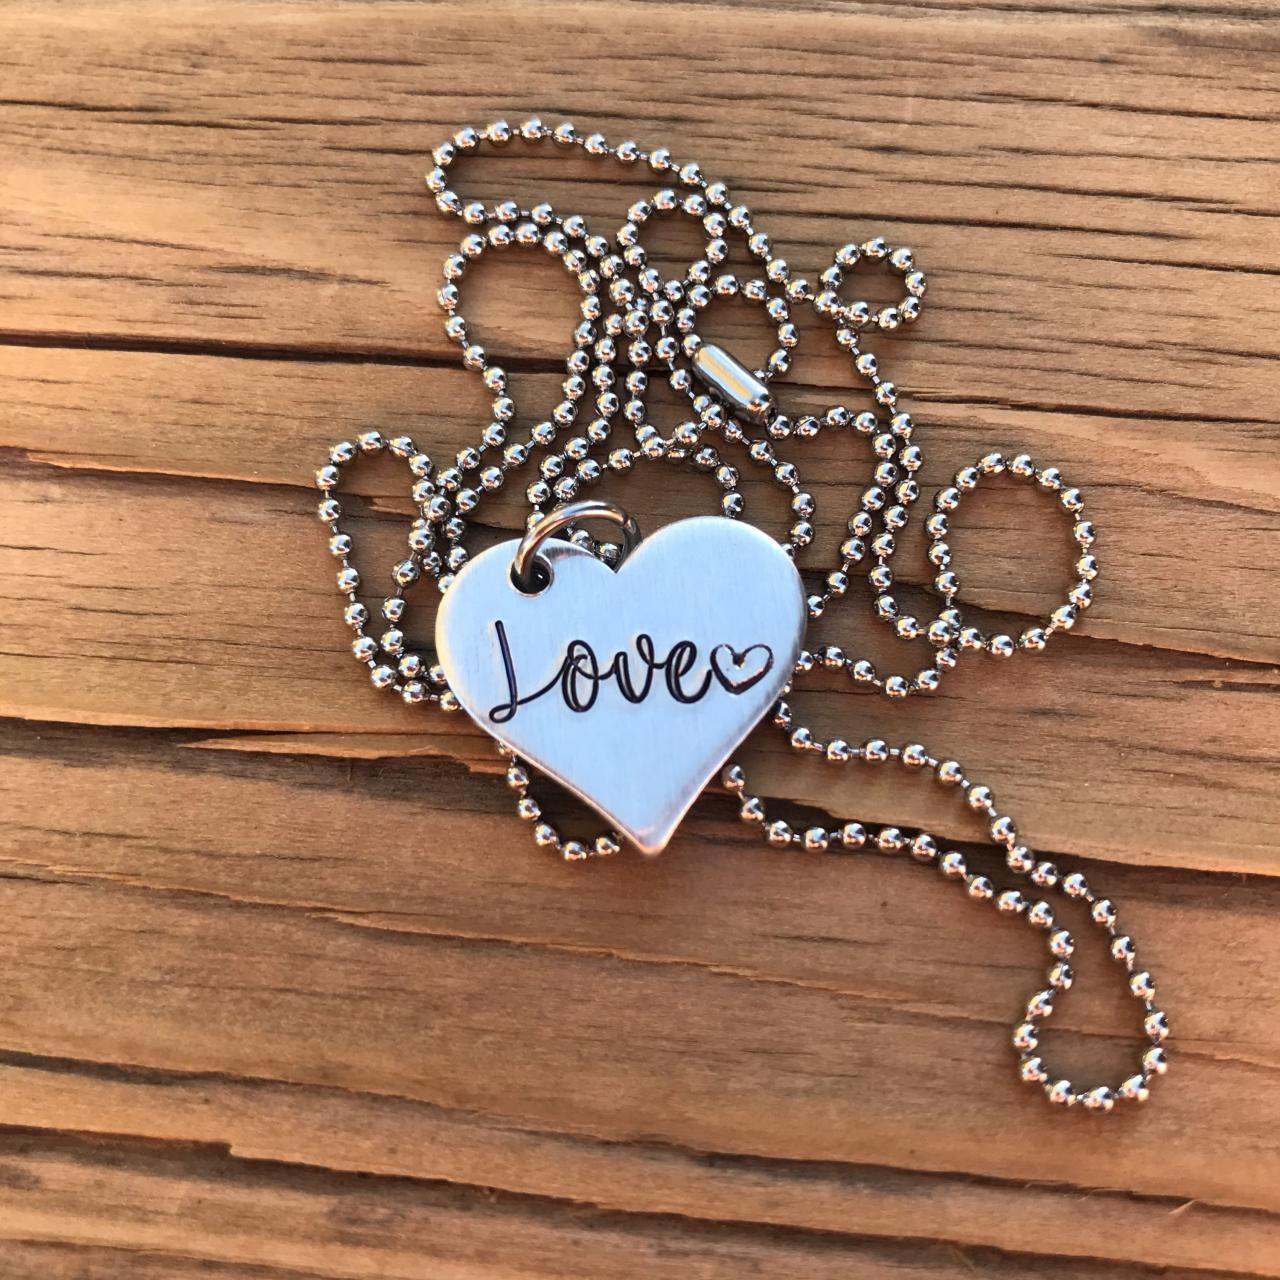 Love, Ball Chain, Aluminum Fancy, Lightweight, Love, Thoughtful Gift, Necklace